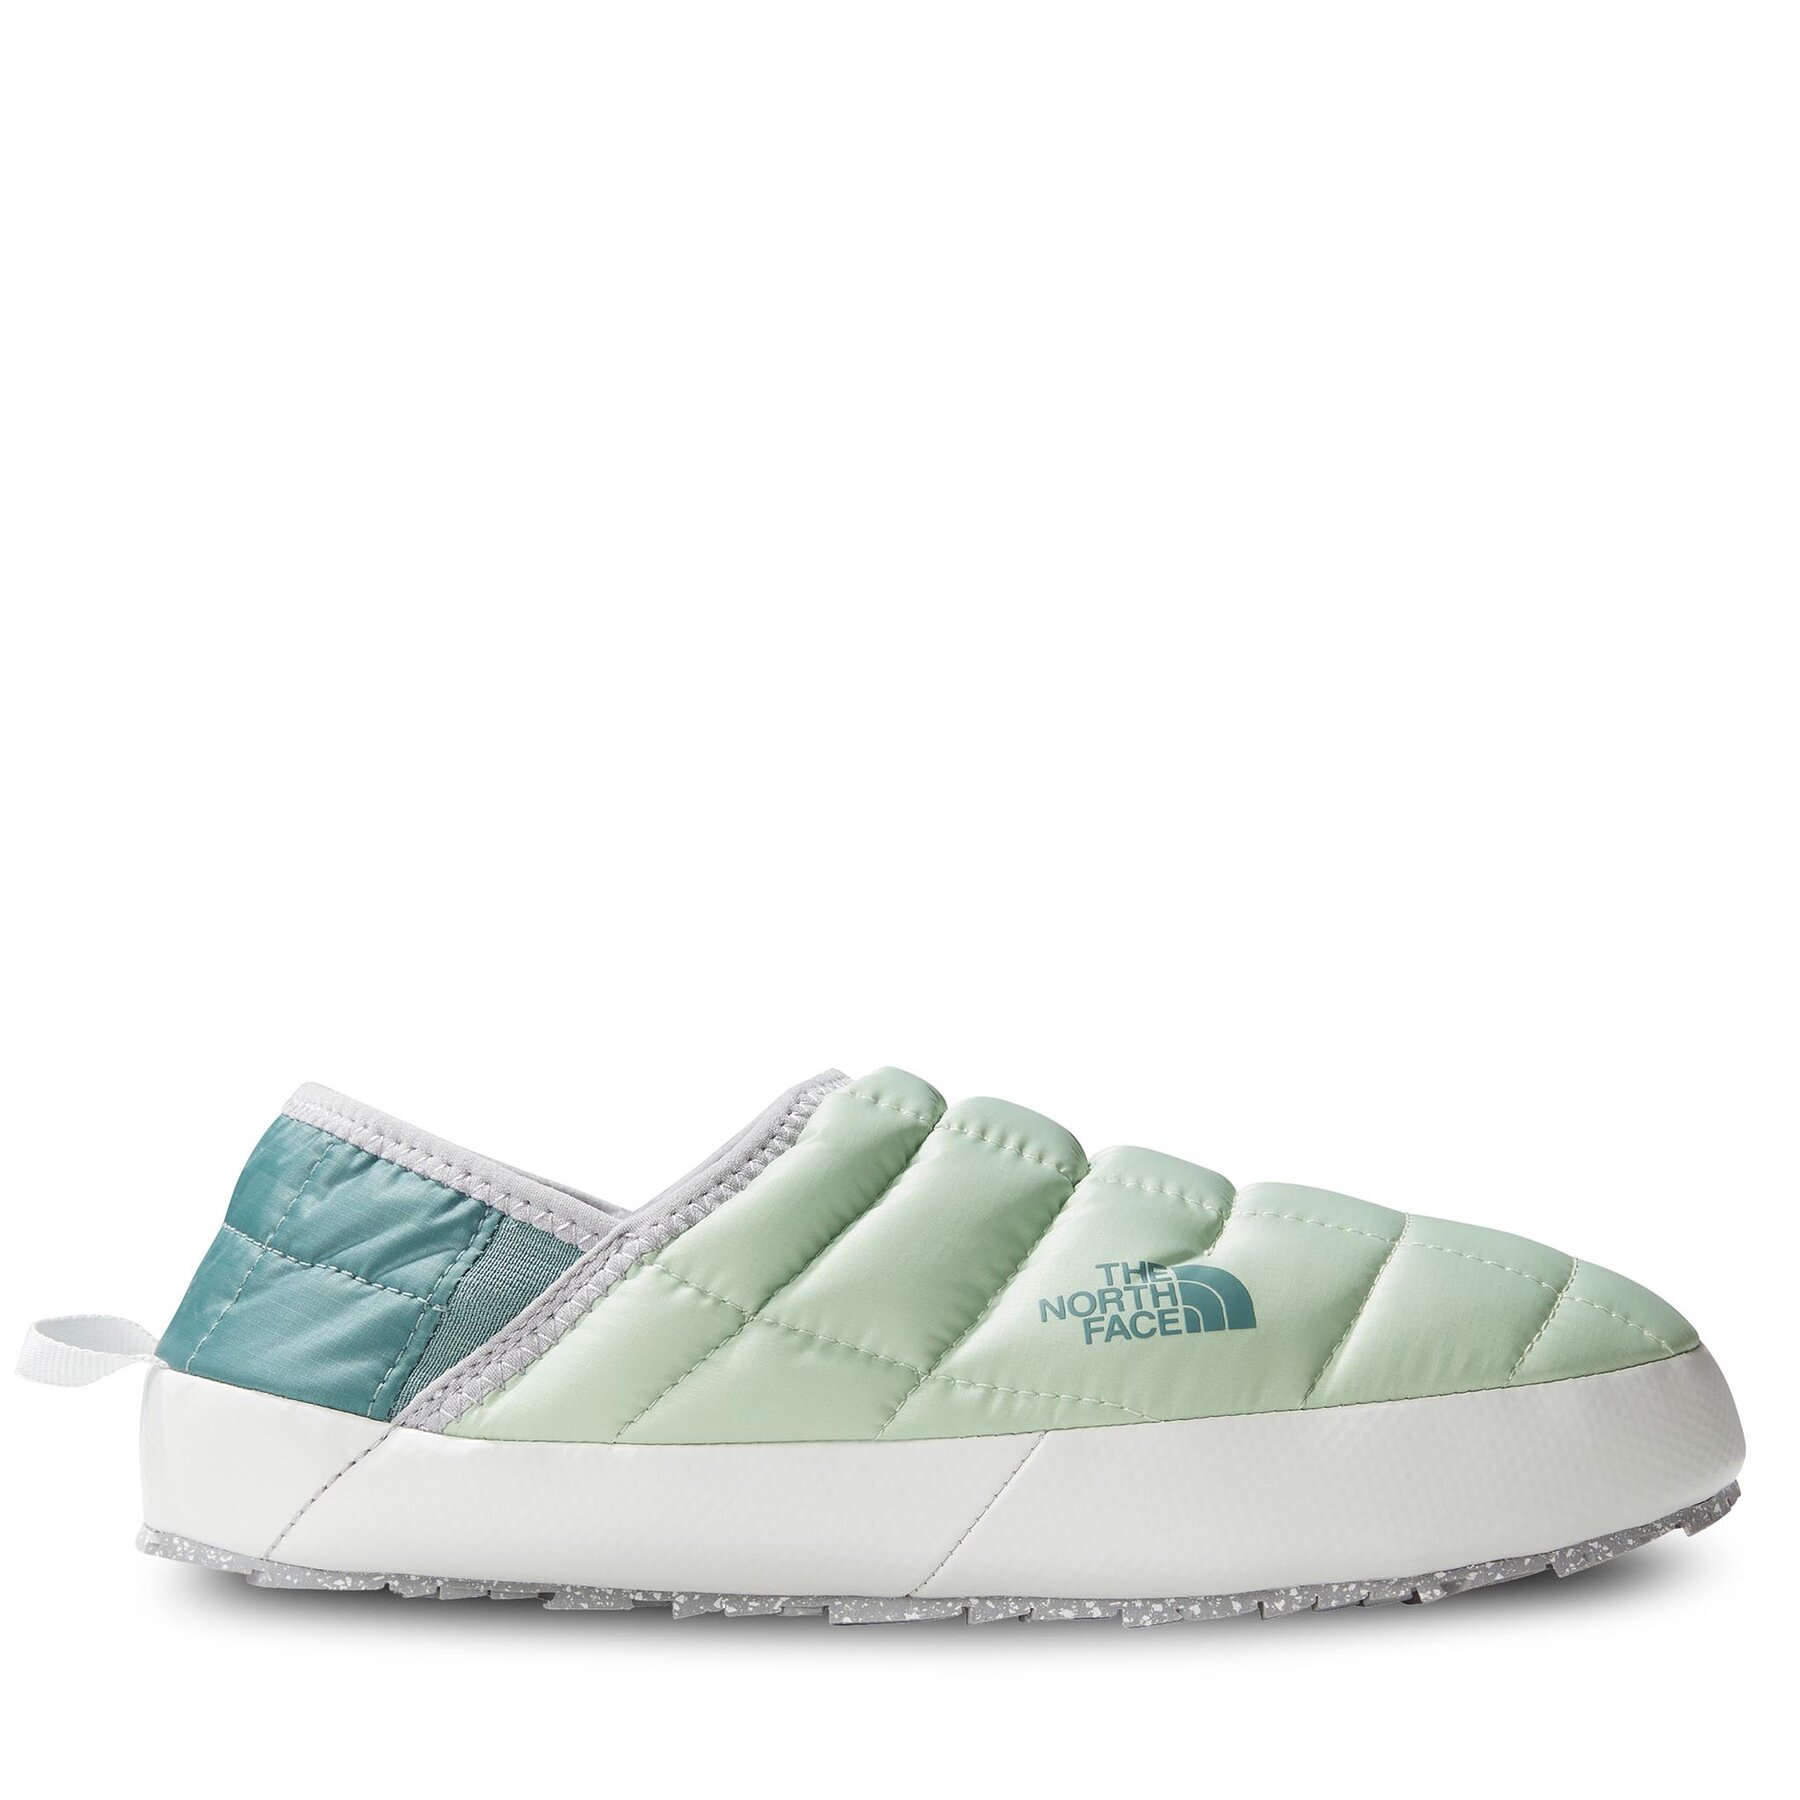 The North Face Women's ThermoBall Traction Mule V misty sage/dark sage